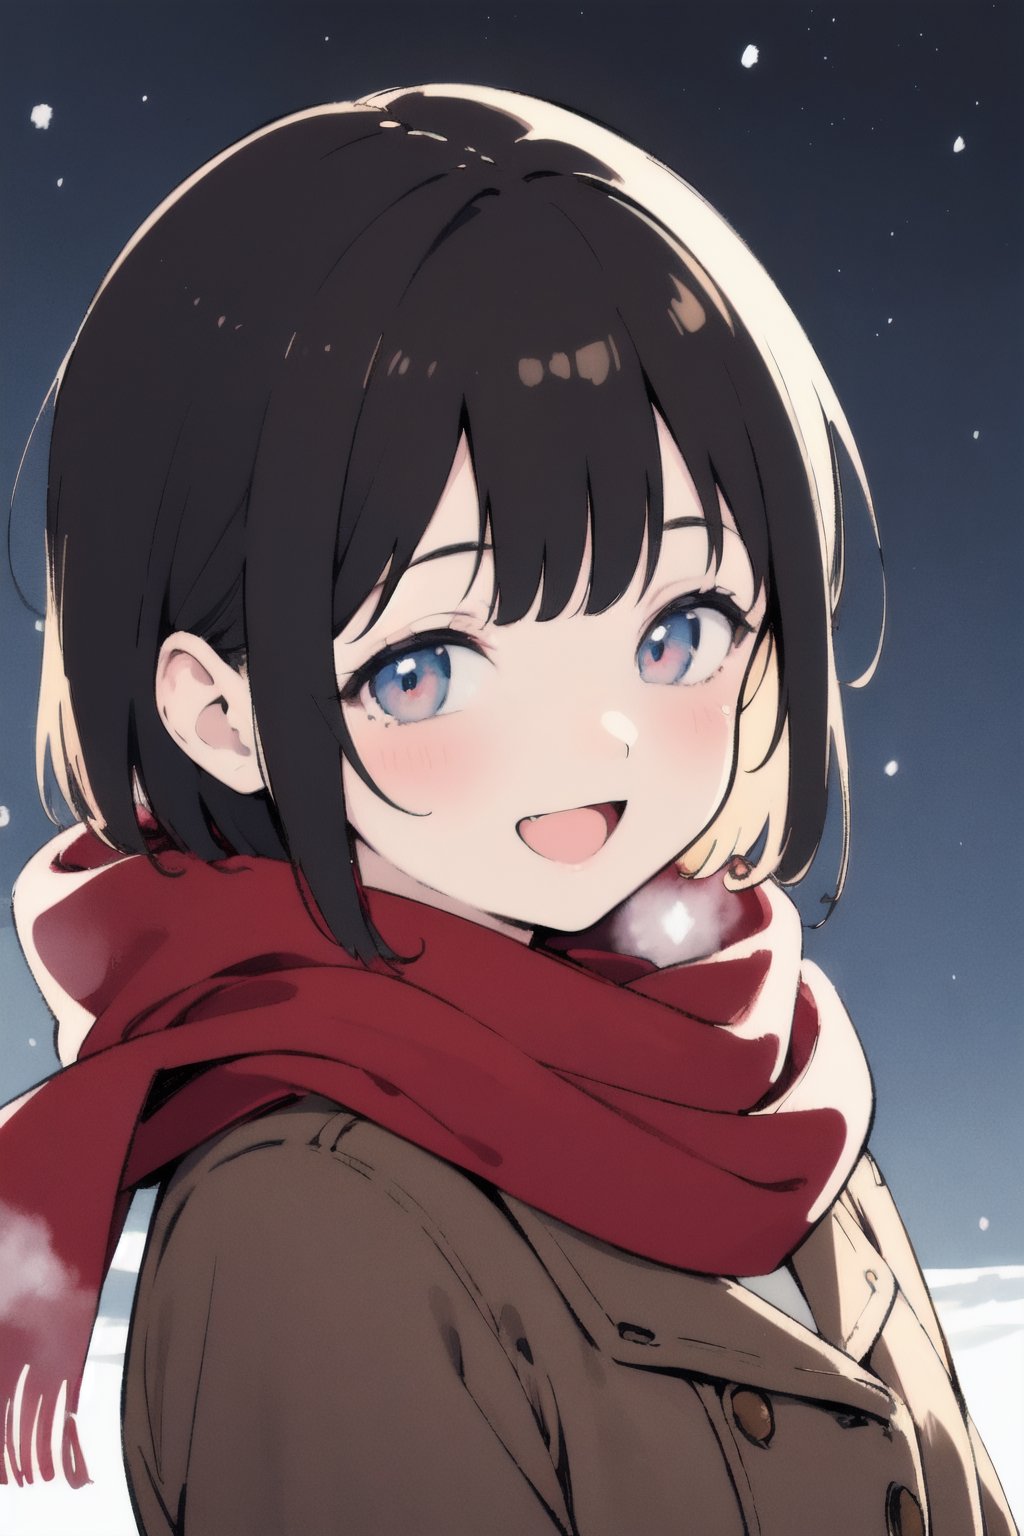 (finely best quality illustration:1.2), (kawaii girl:1.1), (1girl, solo:1.0), (black hair, black short hair:1.0), ((smile:1.0), (:D:0.9), (sigh:1.2):1.0), (brown coat, red scarf:1.0), (upper body, close-up of face:1.0), (outdoors, snow, (snowing:0.7), night, night view, night sky, simple background:1.0), (ultra-detailed, highres:1.0),